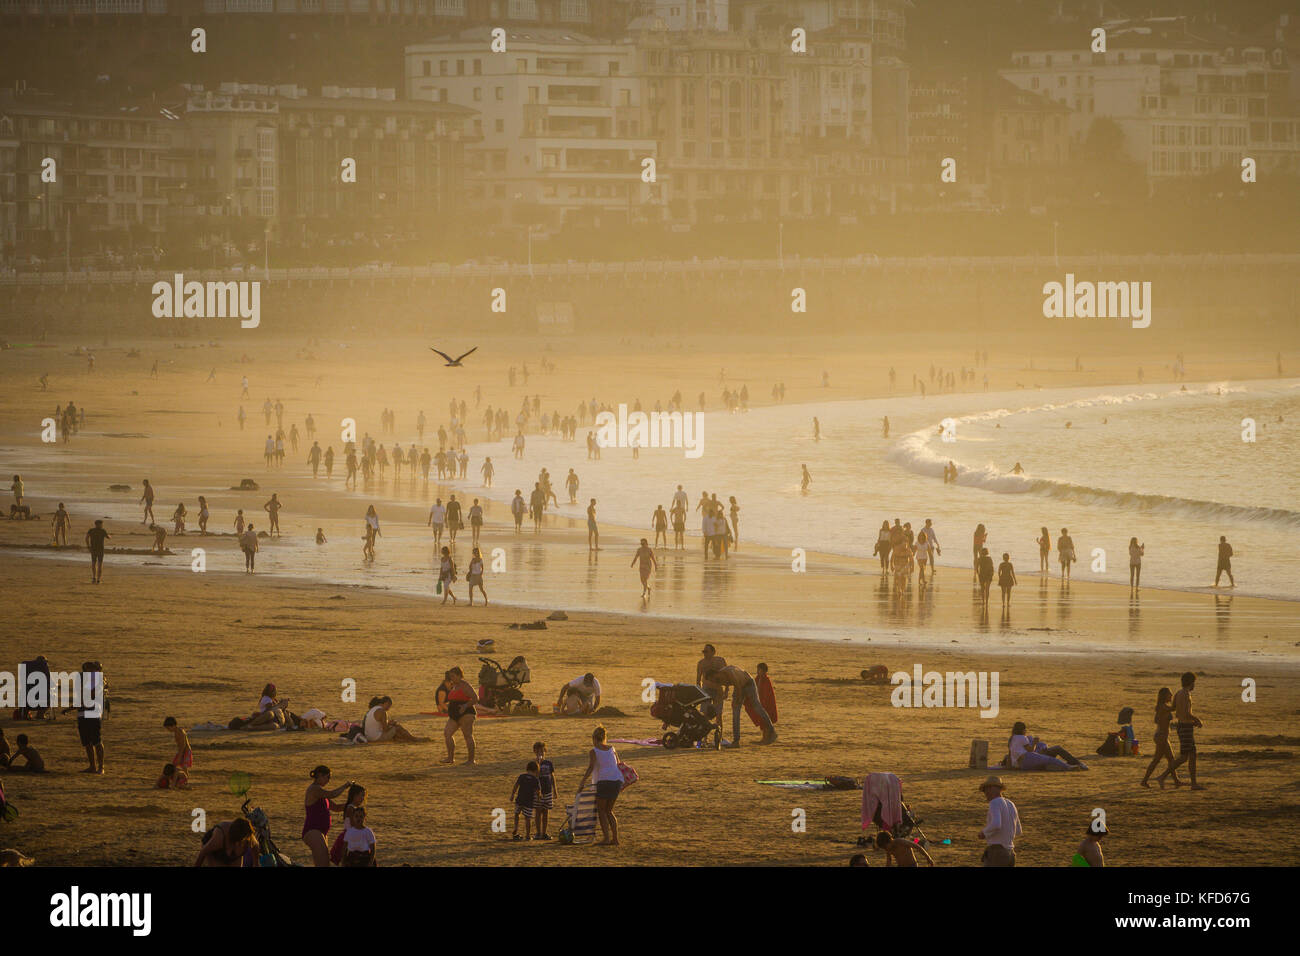 People on the Concha beach enjoying the late afternoon sunshine on a warm October day, San Sebastian, Basque Country, Spain. Stock Photo